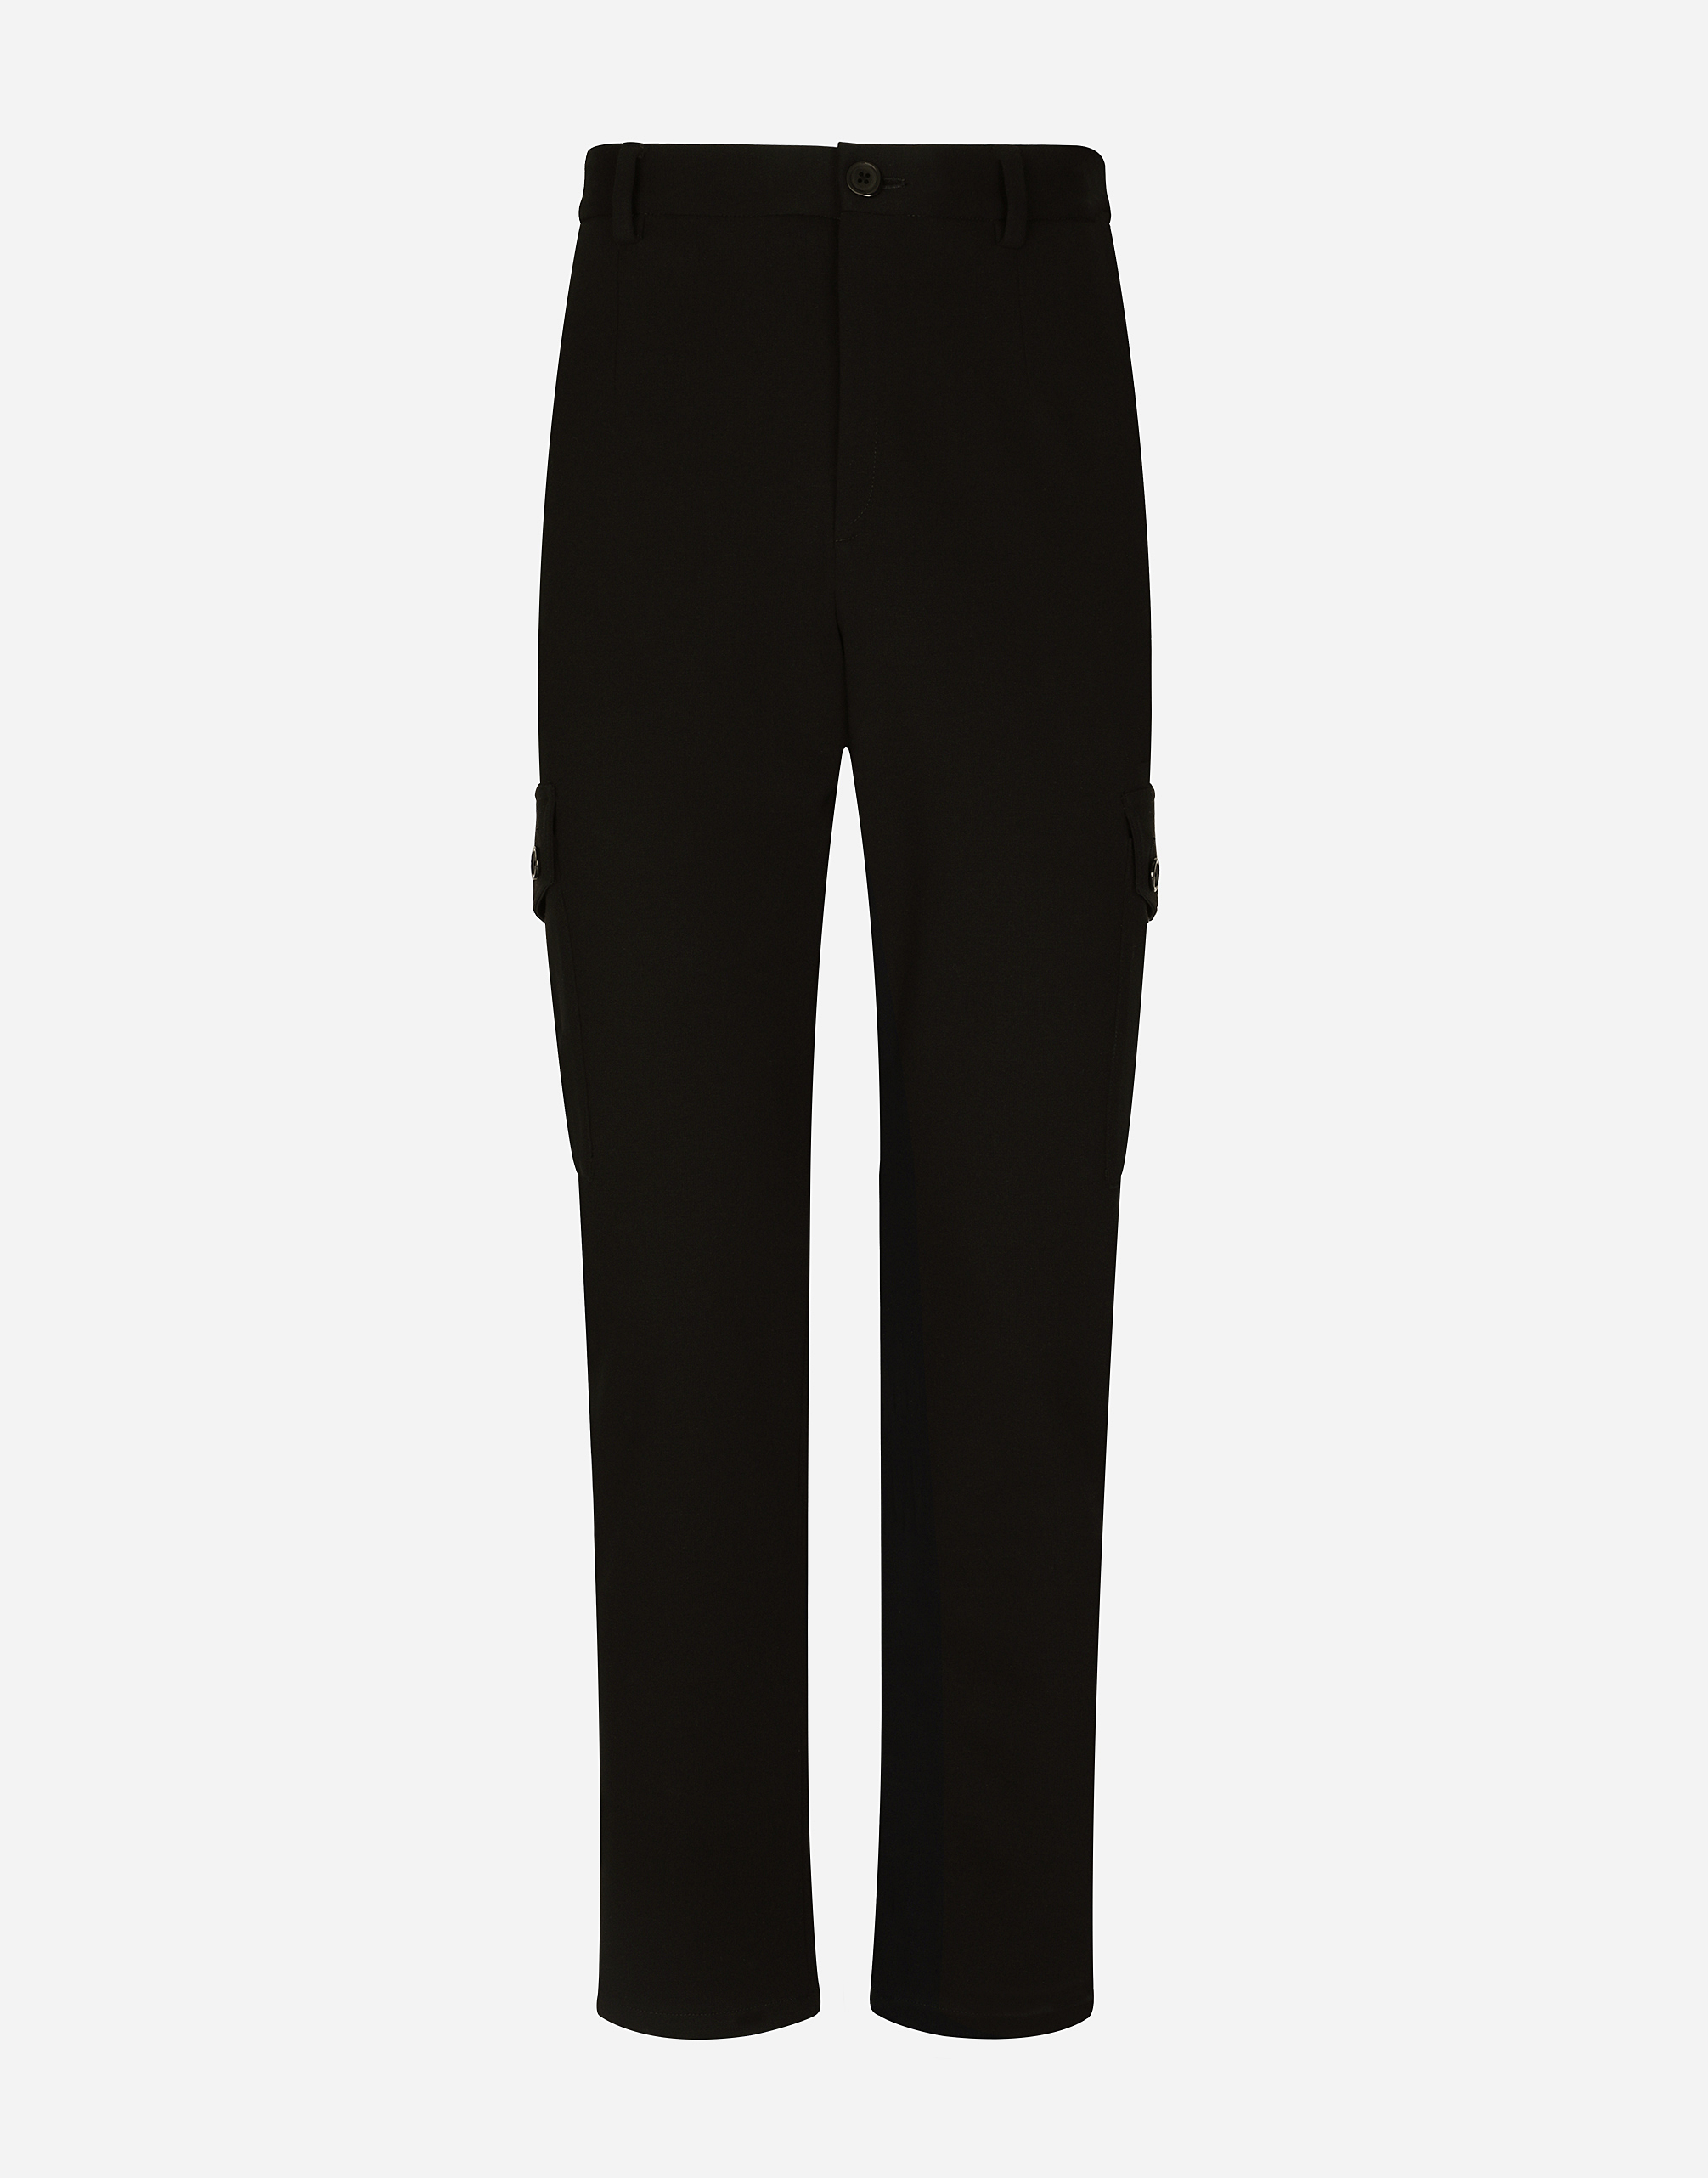 Stretch technical jersey cargo pants in Black